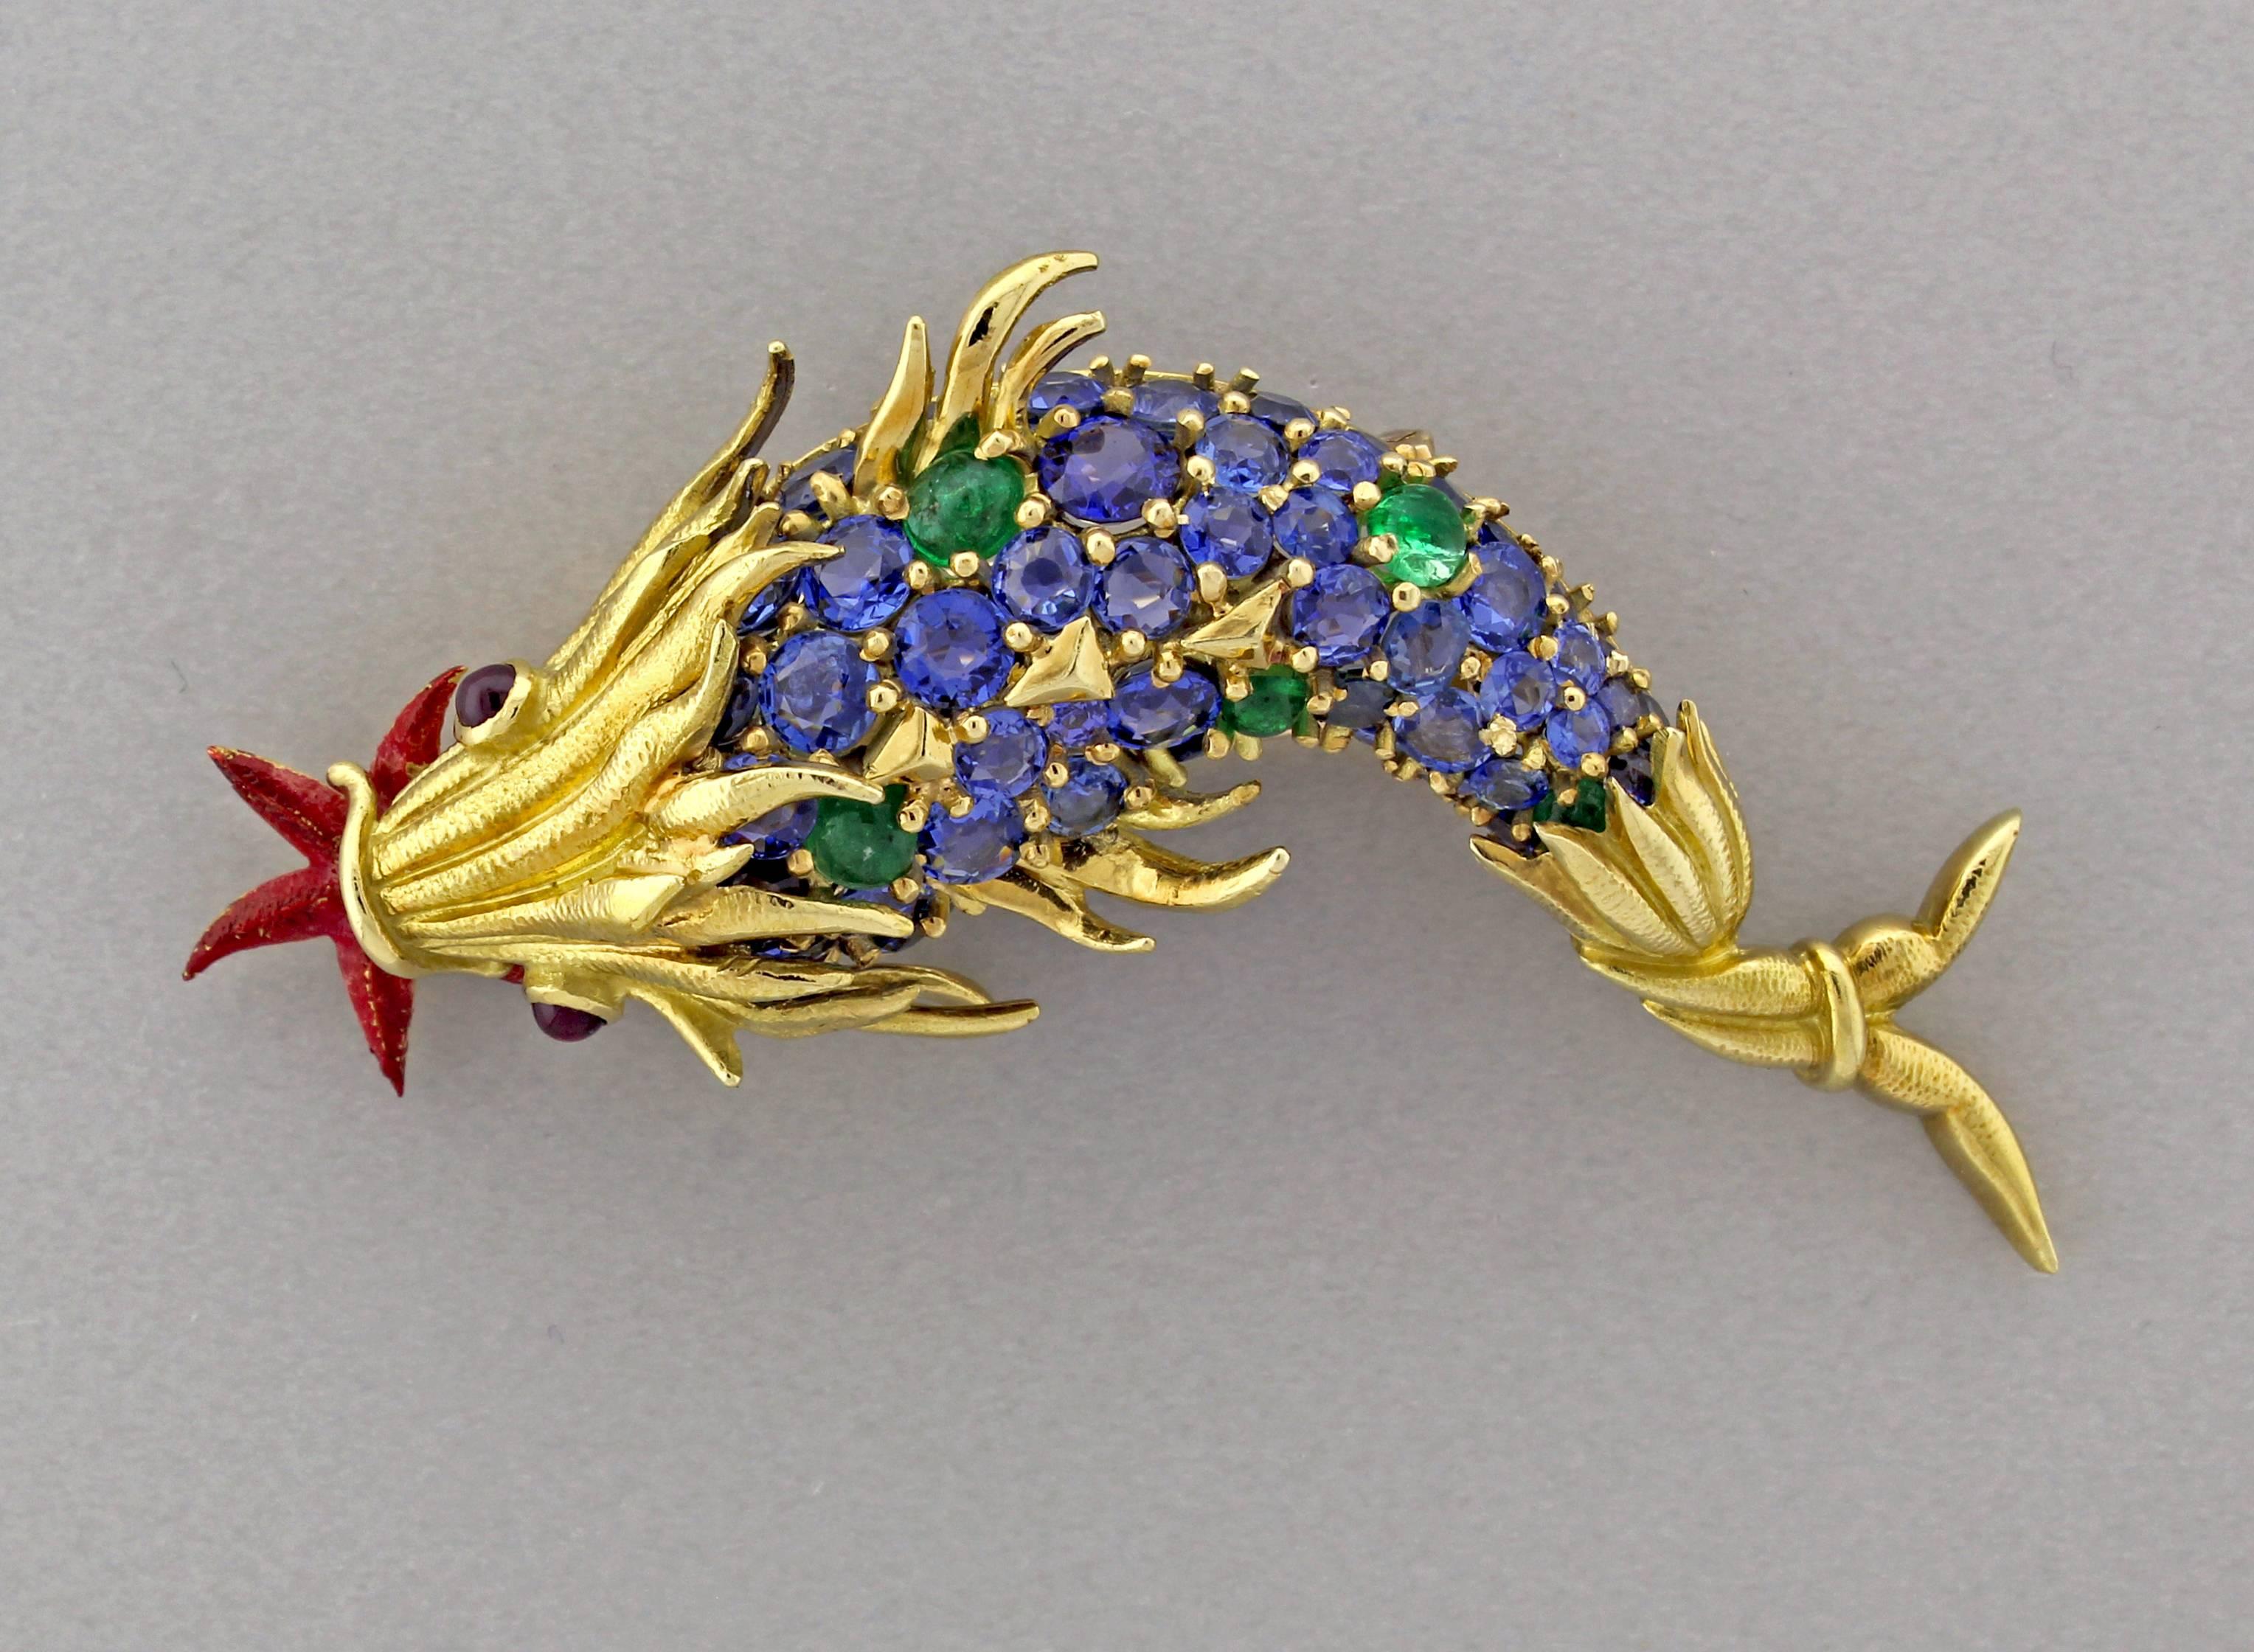  From acclaimed Tiffany & Co. designer, Jean Schlumberger, his iconic fish brooch. Meticulously crafted in 18 karat yellow gold the brooch exemplifies the artistry of Jean Schlumberger.
     